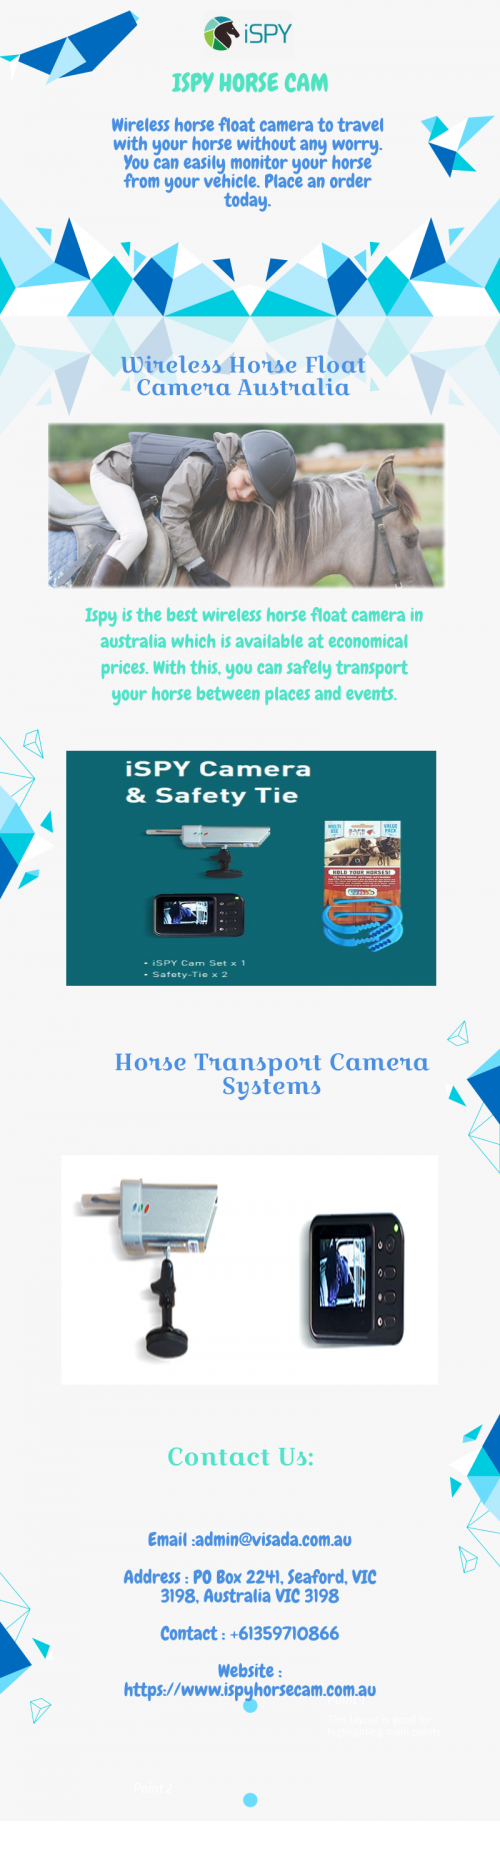 Now monitor your horse with our wireless monitor horse camera, it will be easy to use and you can monitor your horse activities easily. For more info visit our website today.https://www.ispyhorsecam.com.au/